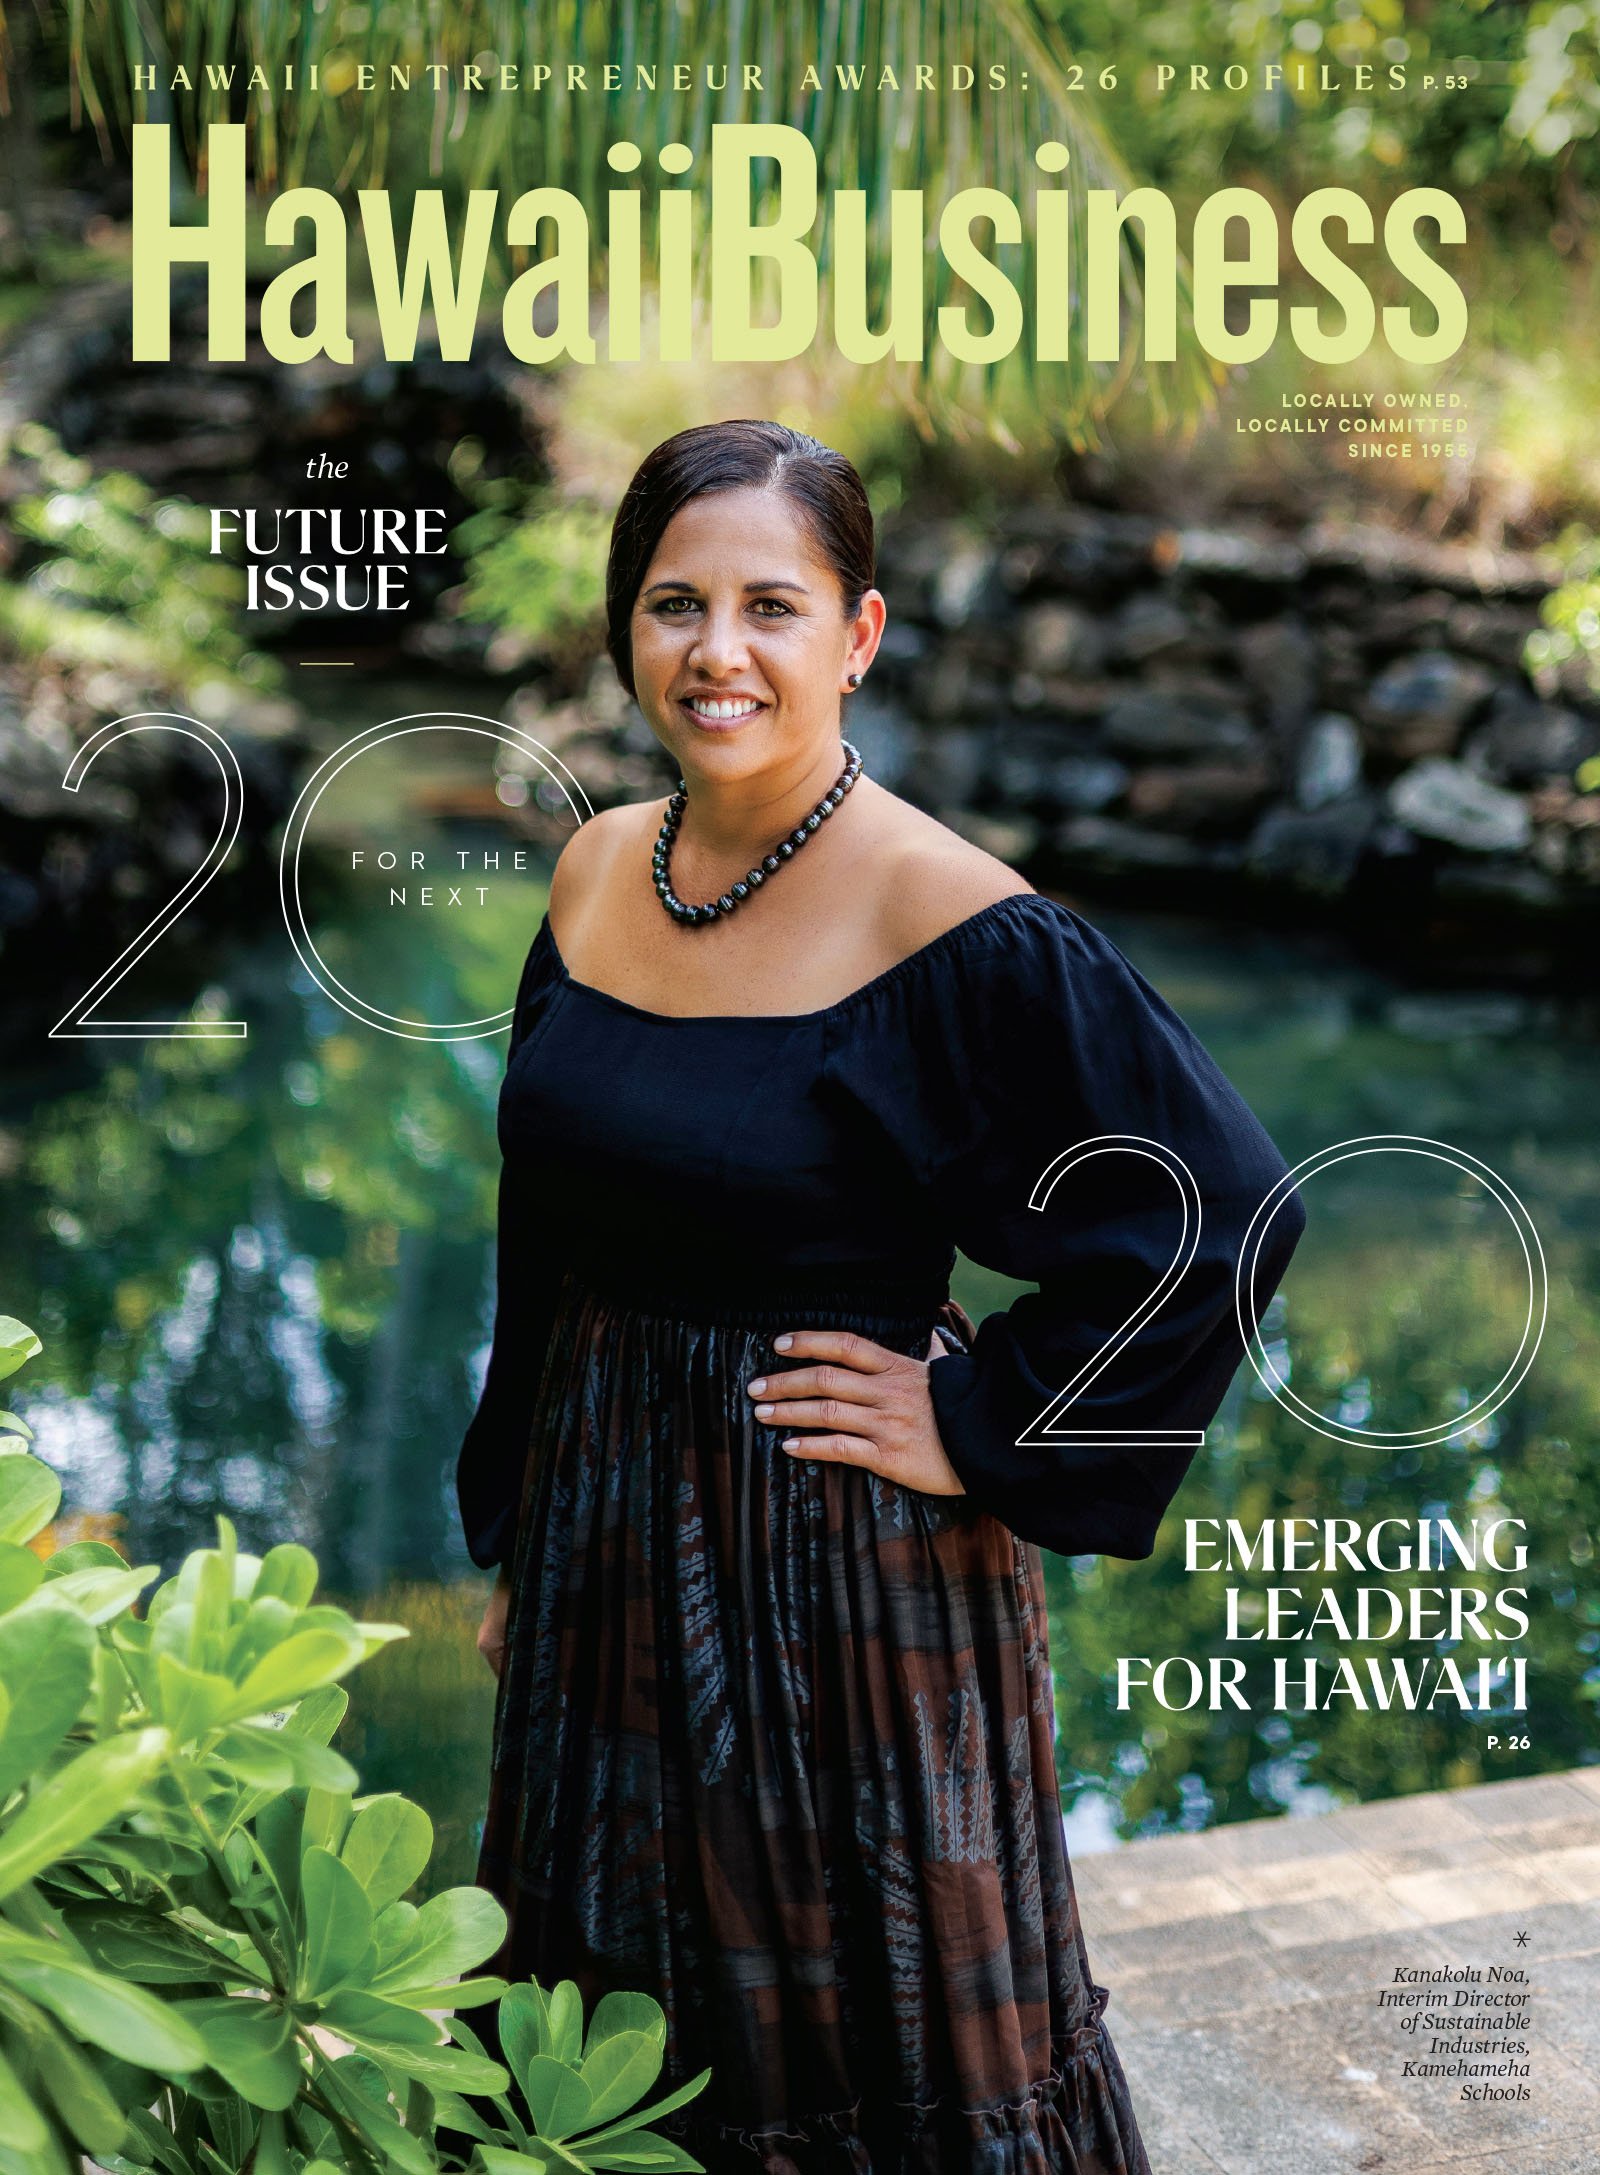 2019 Black Book: 339 Executives to Know - Hawaii Business Magazine